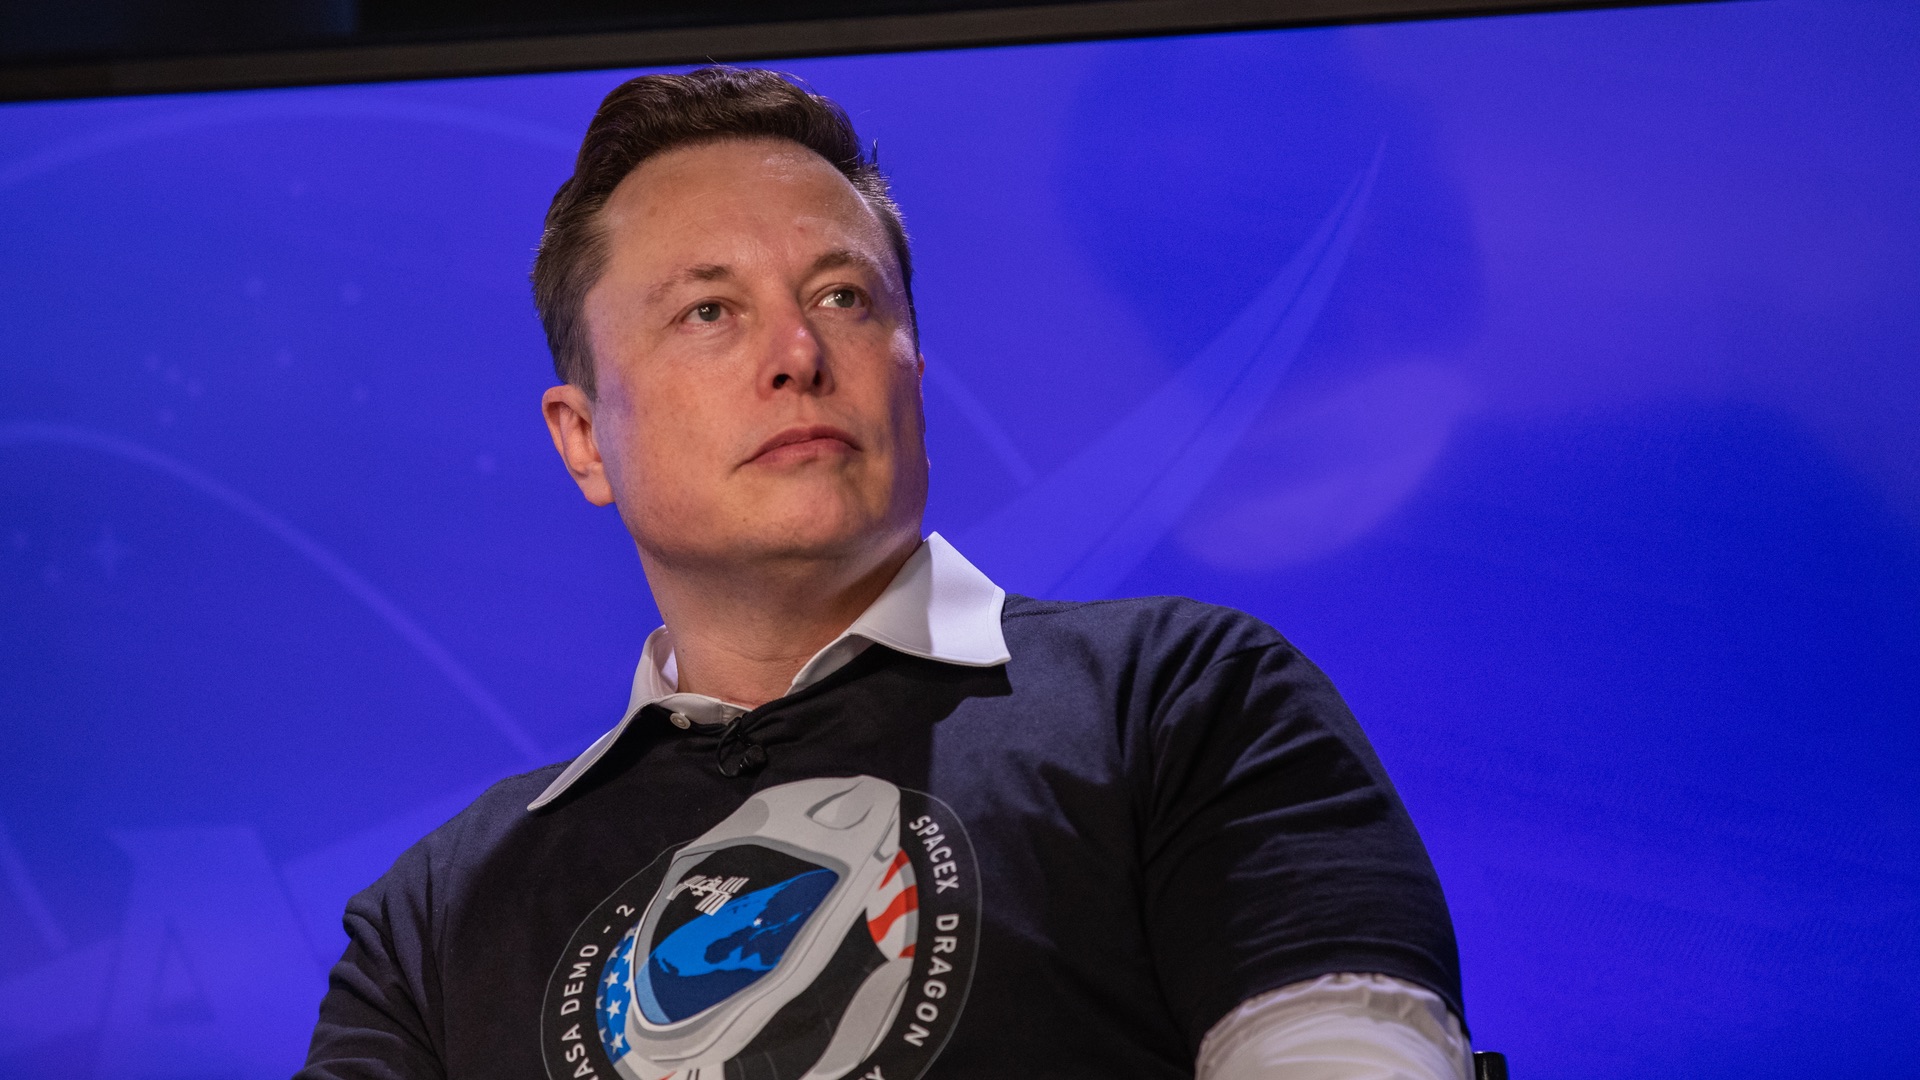 Elon Musk will also connect the Czech Republic to its internet.  But you will pay extra for his ambitious vision thumbnail